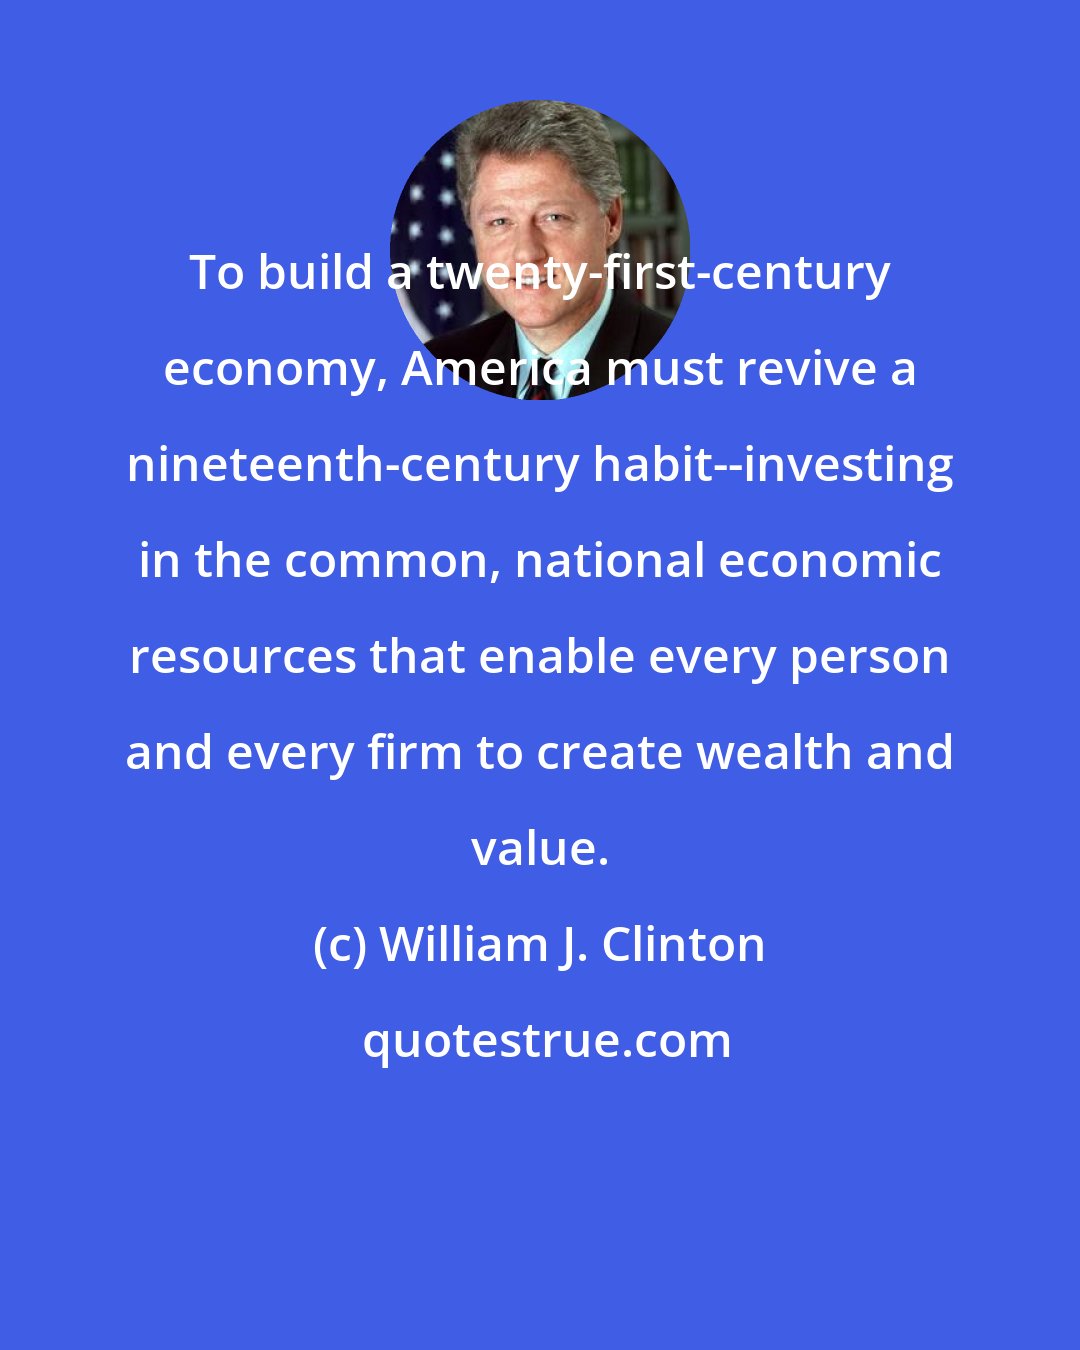 William J. Clinton: To build a twenty-first-century economy, America must revive a nineteenth-century habit--investing in the common, national economic resources that enable every person and every firm to create wealth and value.